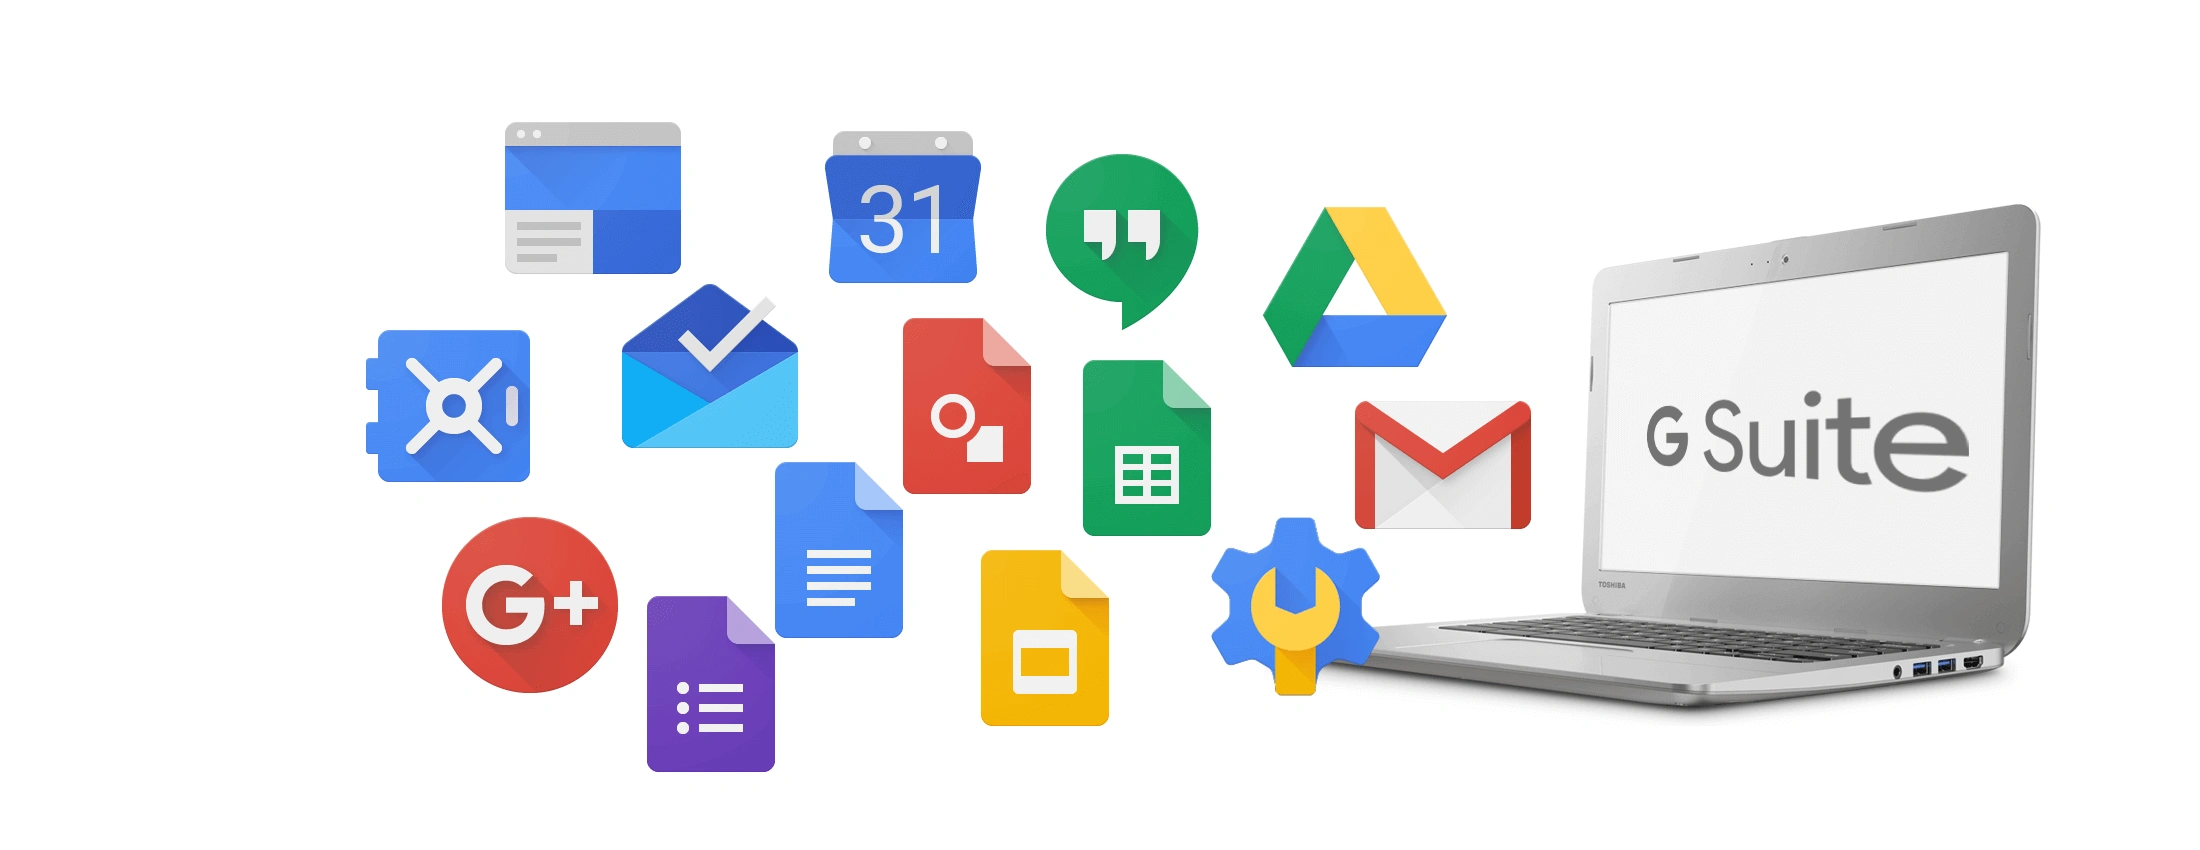 Scripts and tips to backup G Suite for free featured image